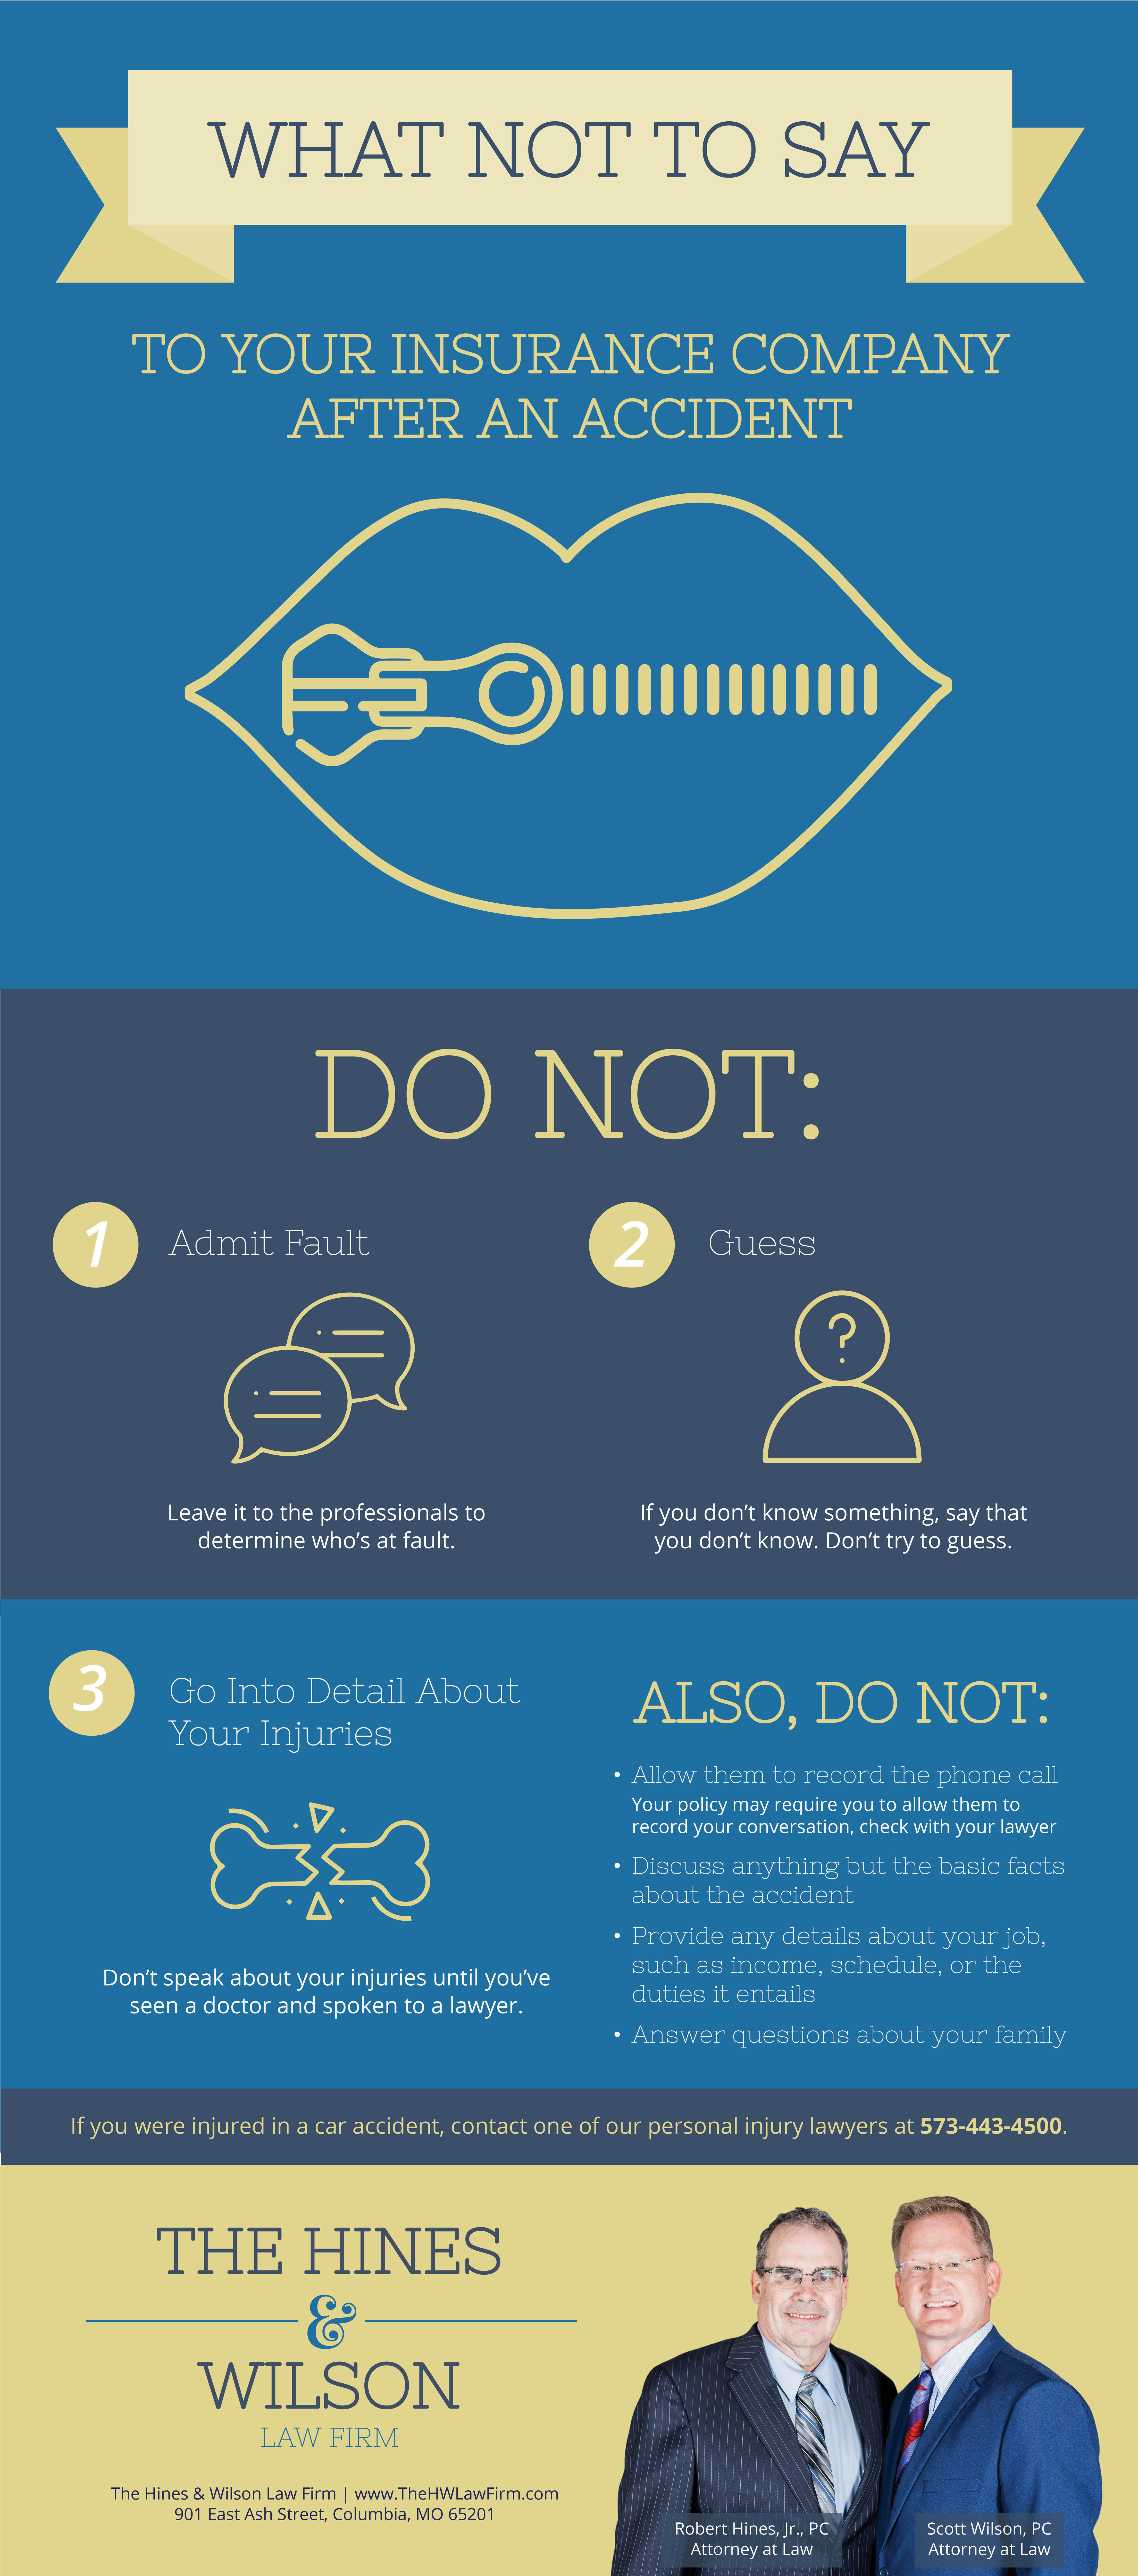 what not to say to your insurance company after an accident infographic